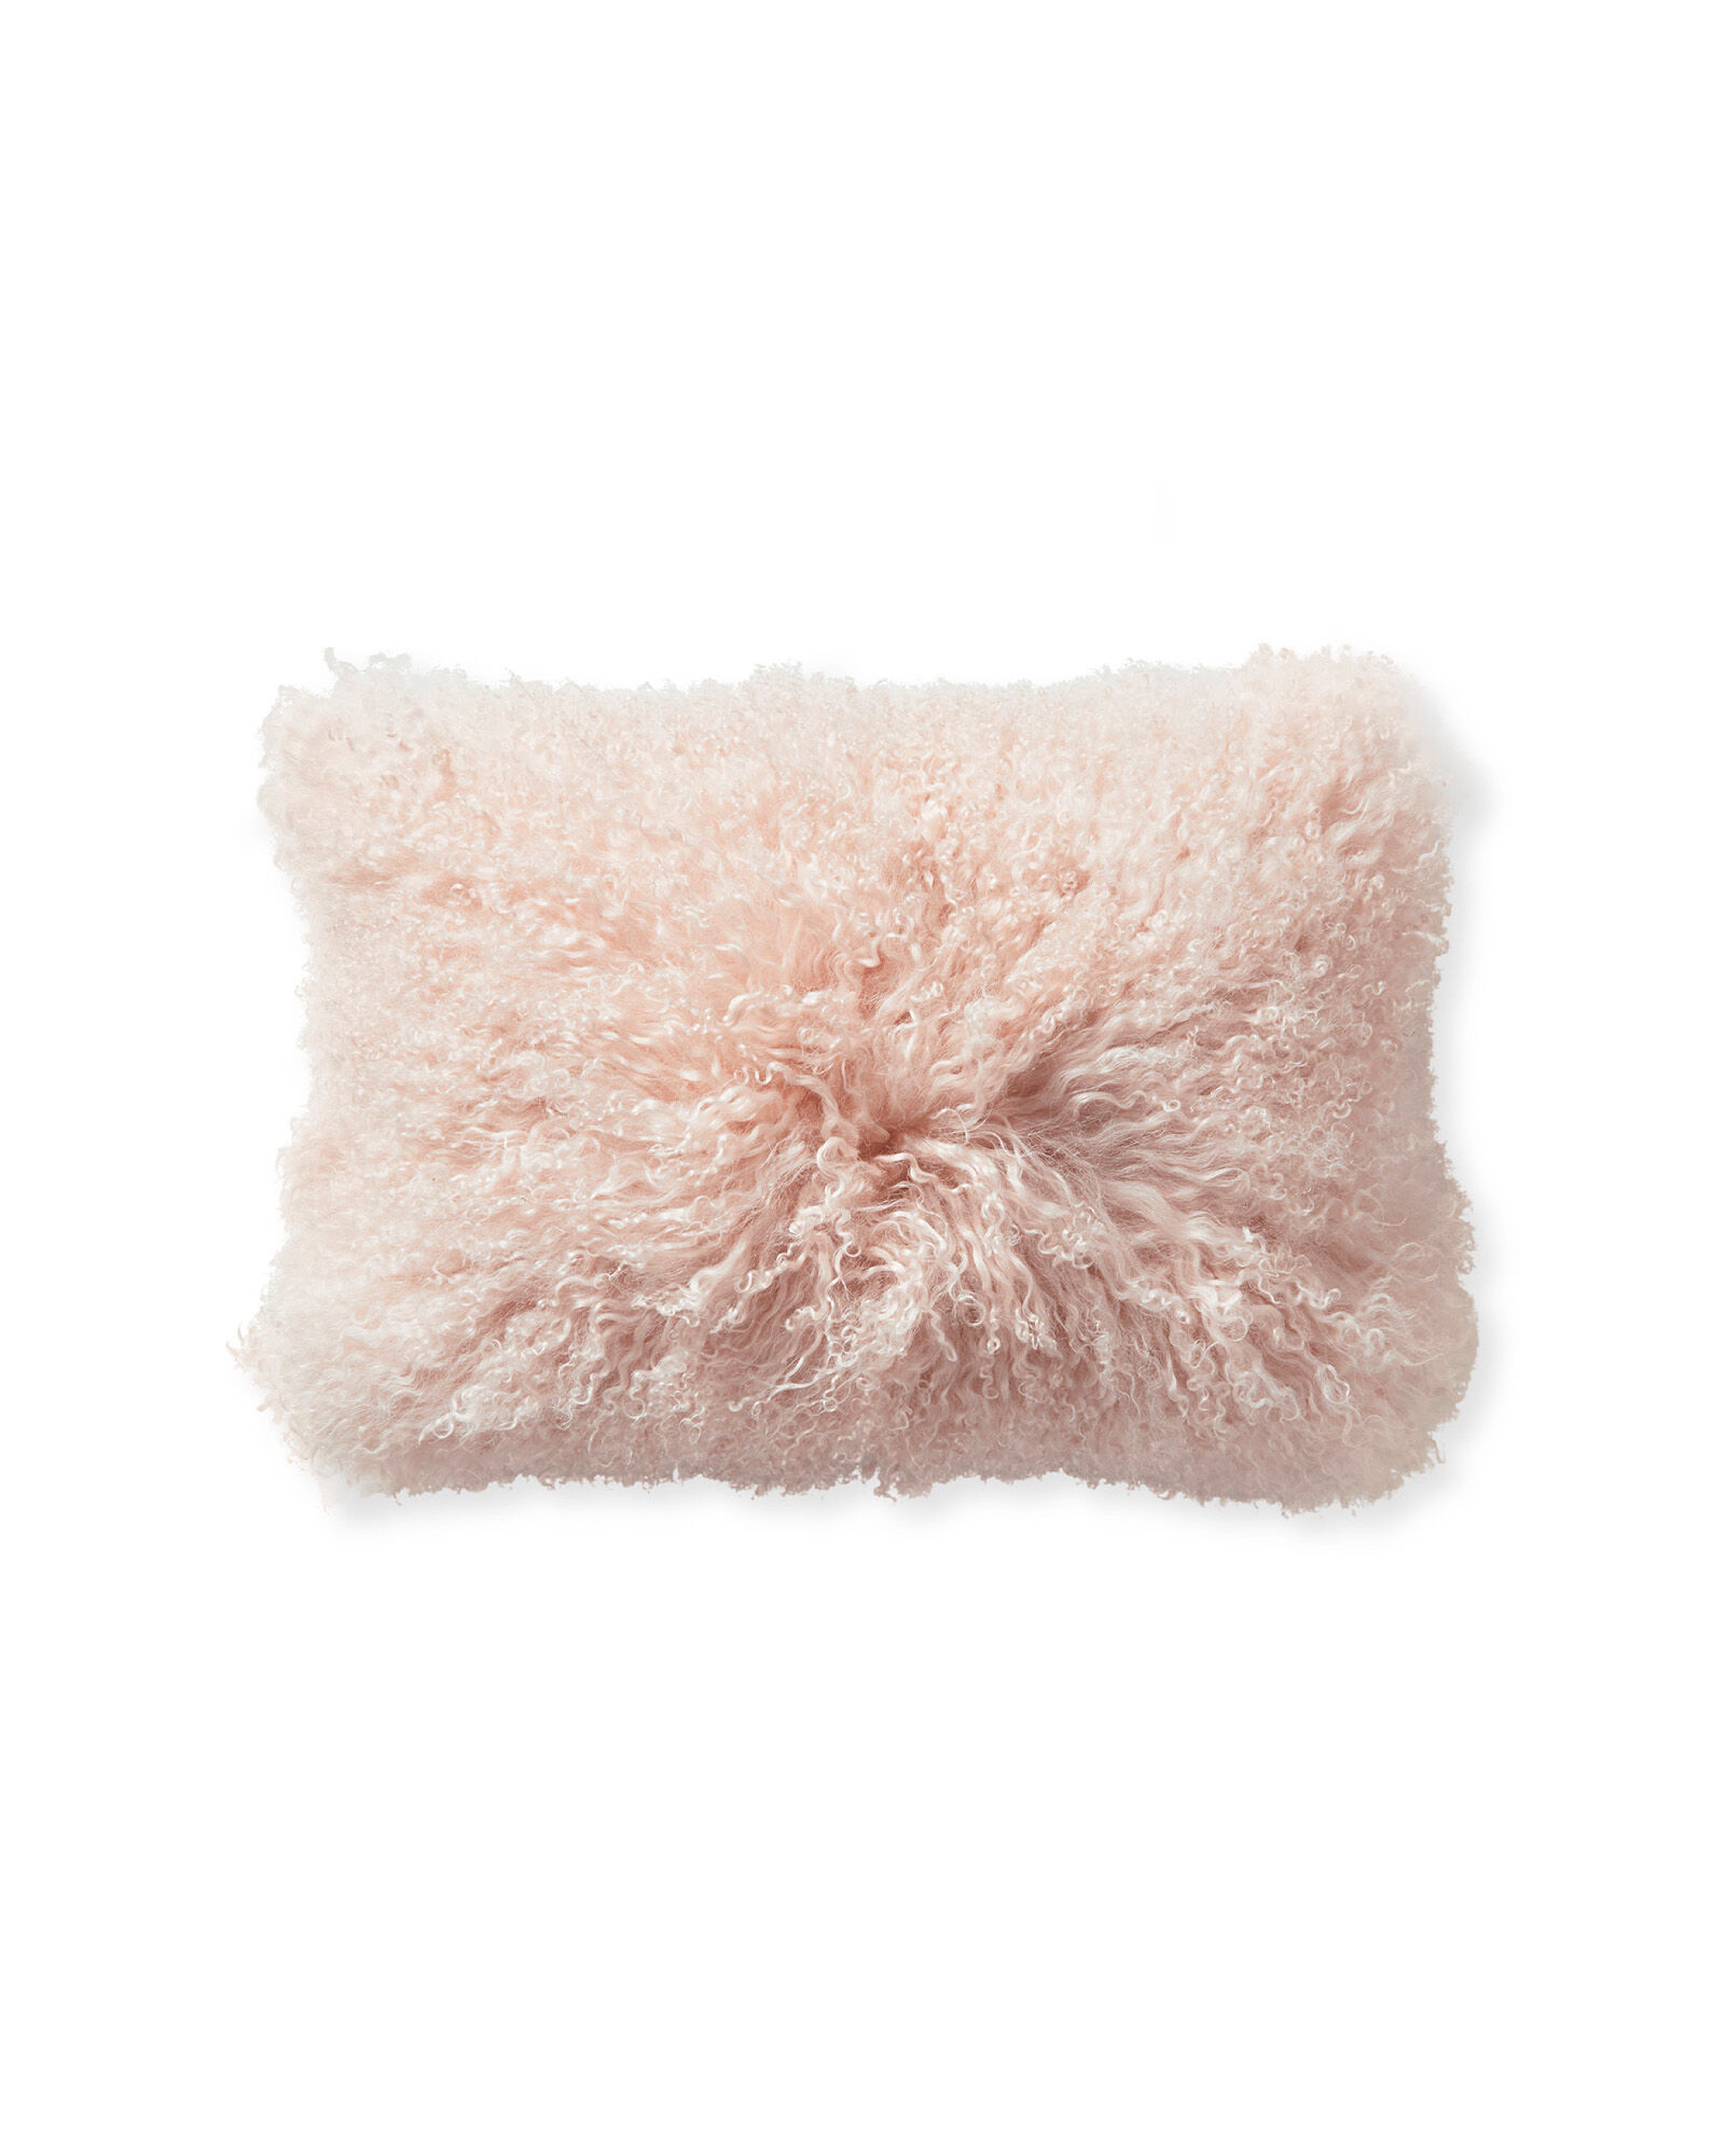 Silverwood Pillow Cover - Serena and Lily